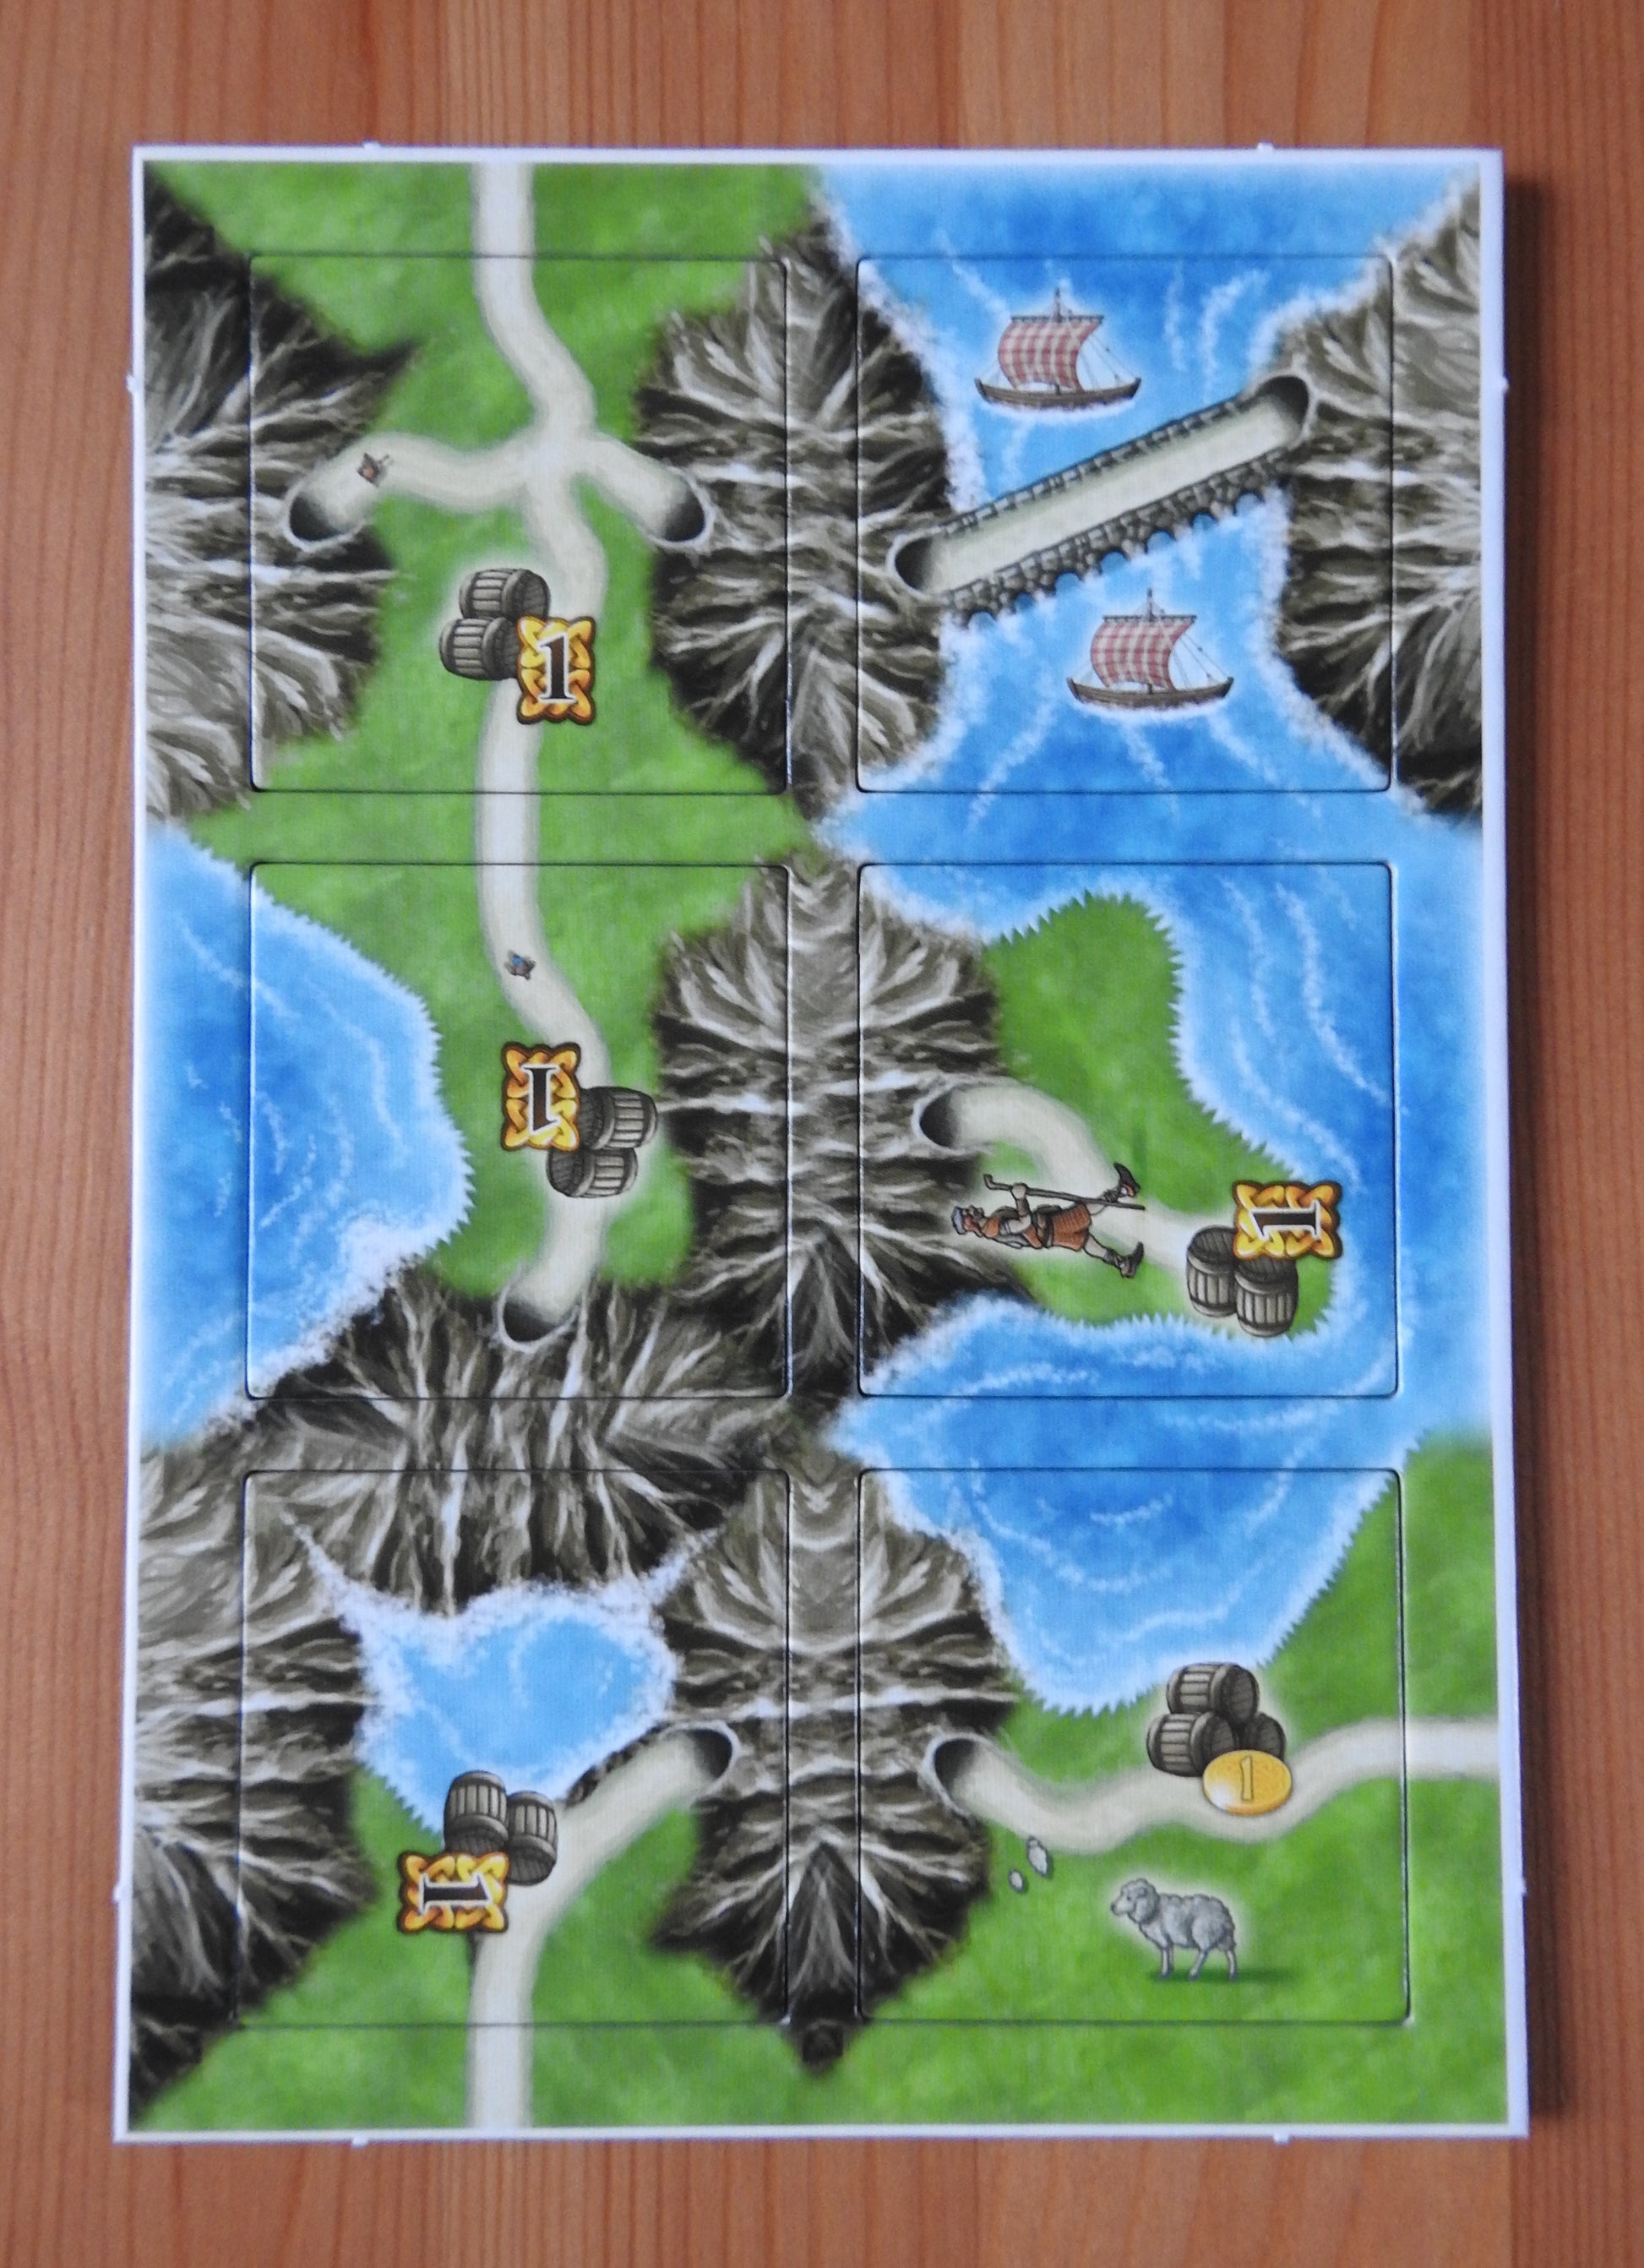 View showing all 6 of the tiles that are included in the Tunnel Tiles mini expansion for Isle of Skye.